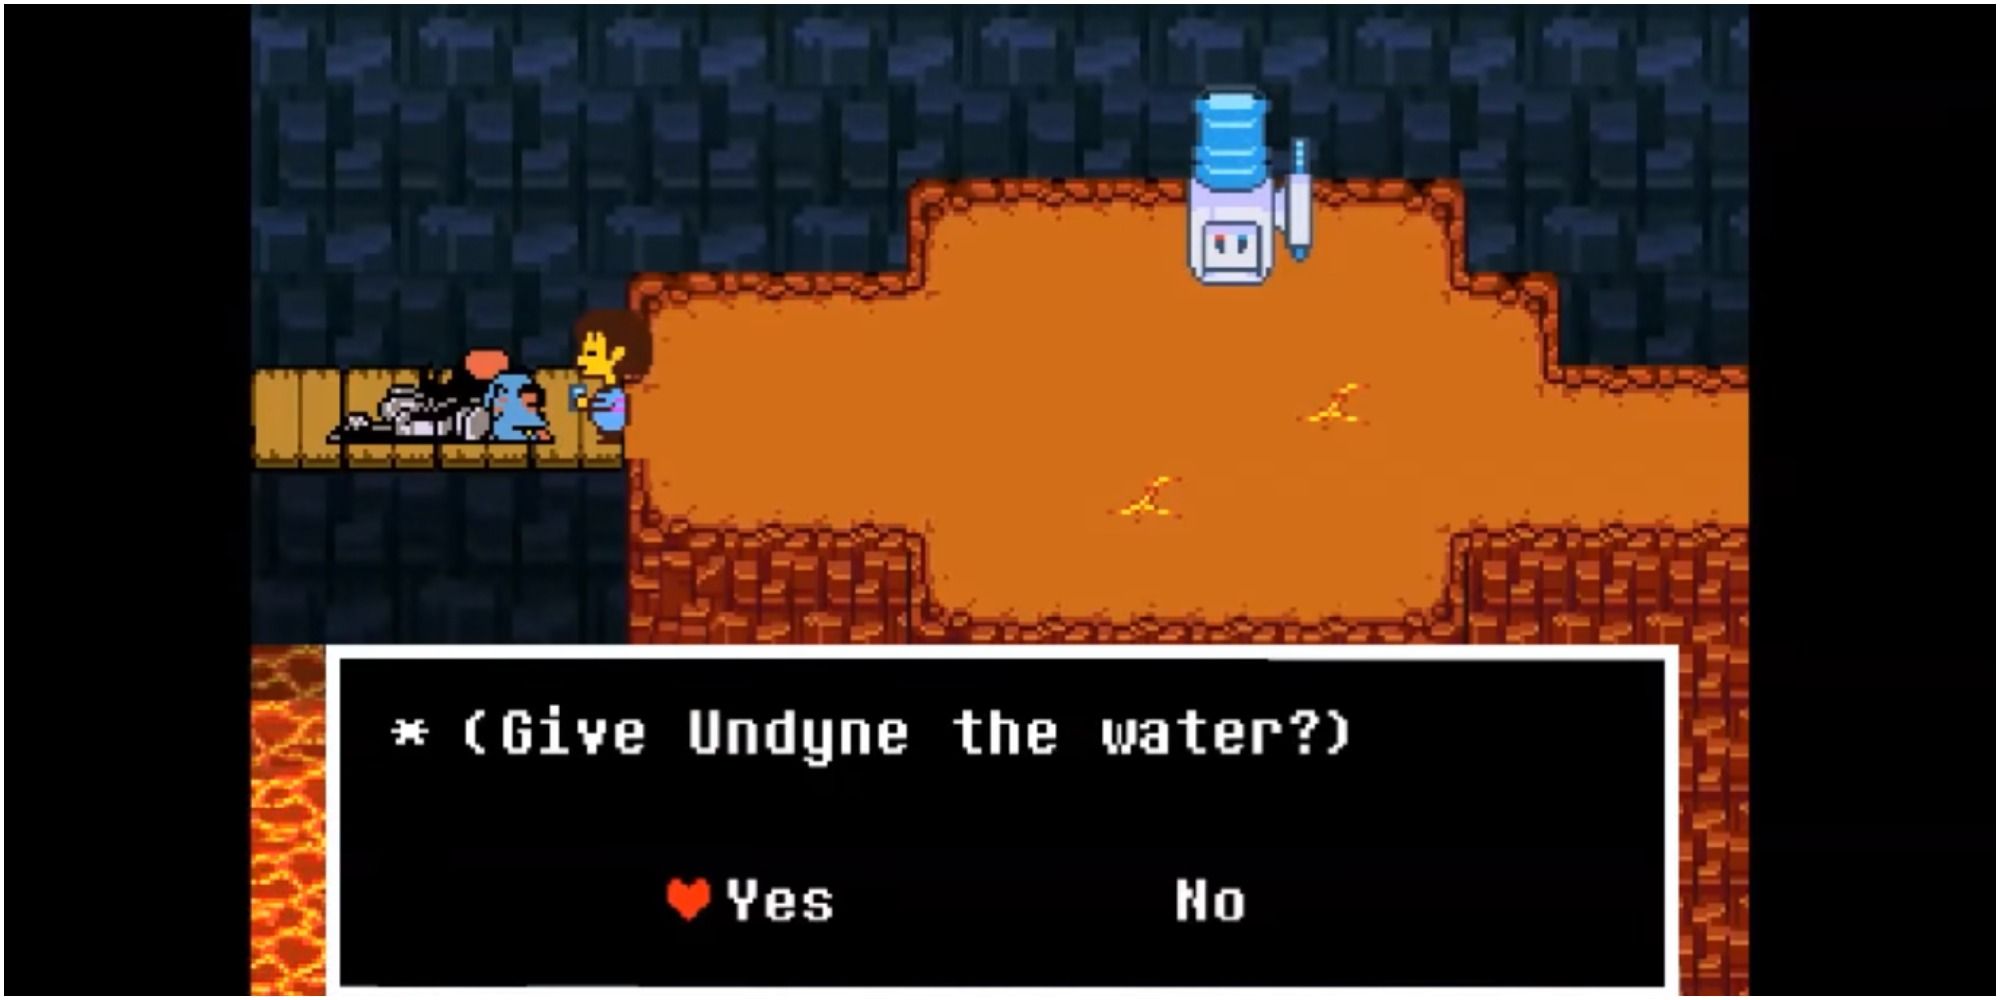 how to beat undyne the undying